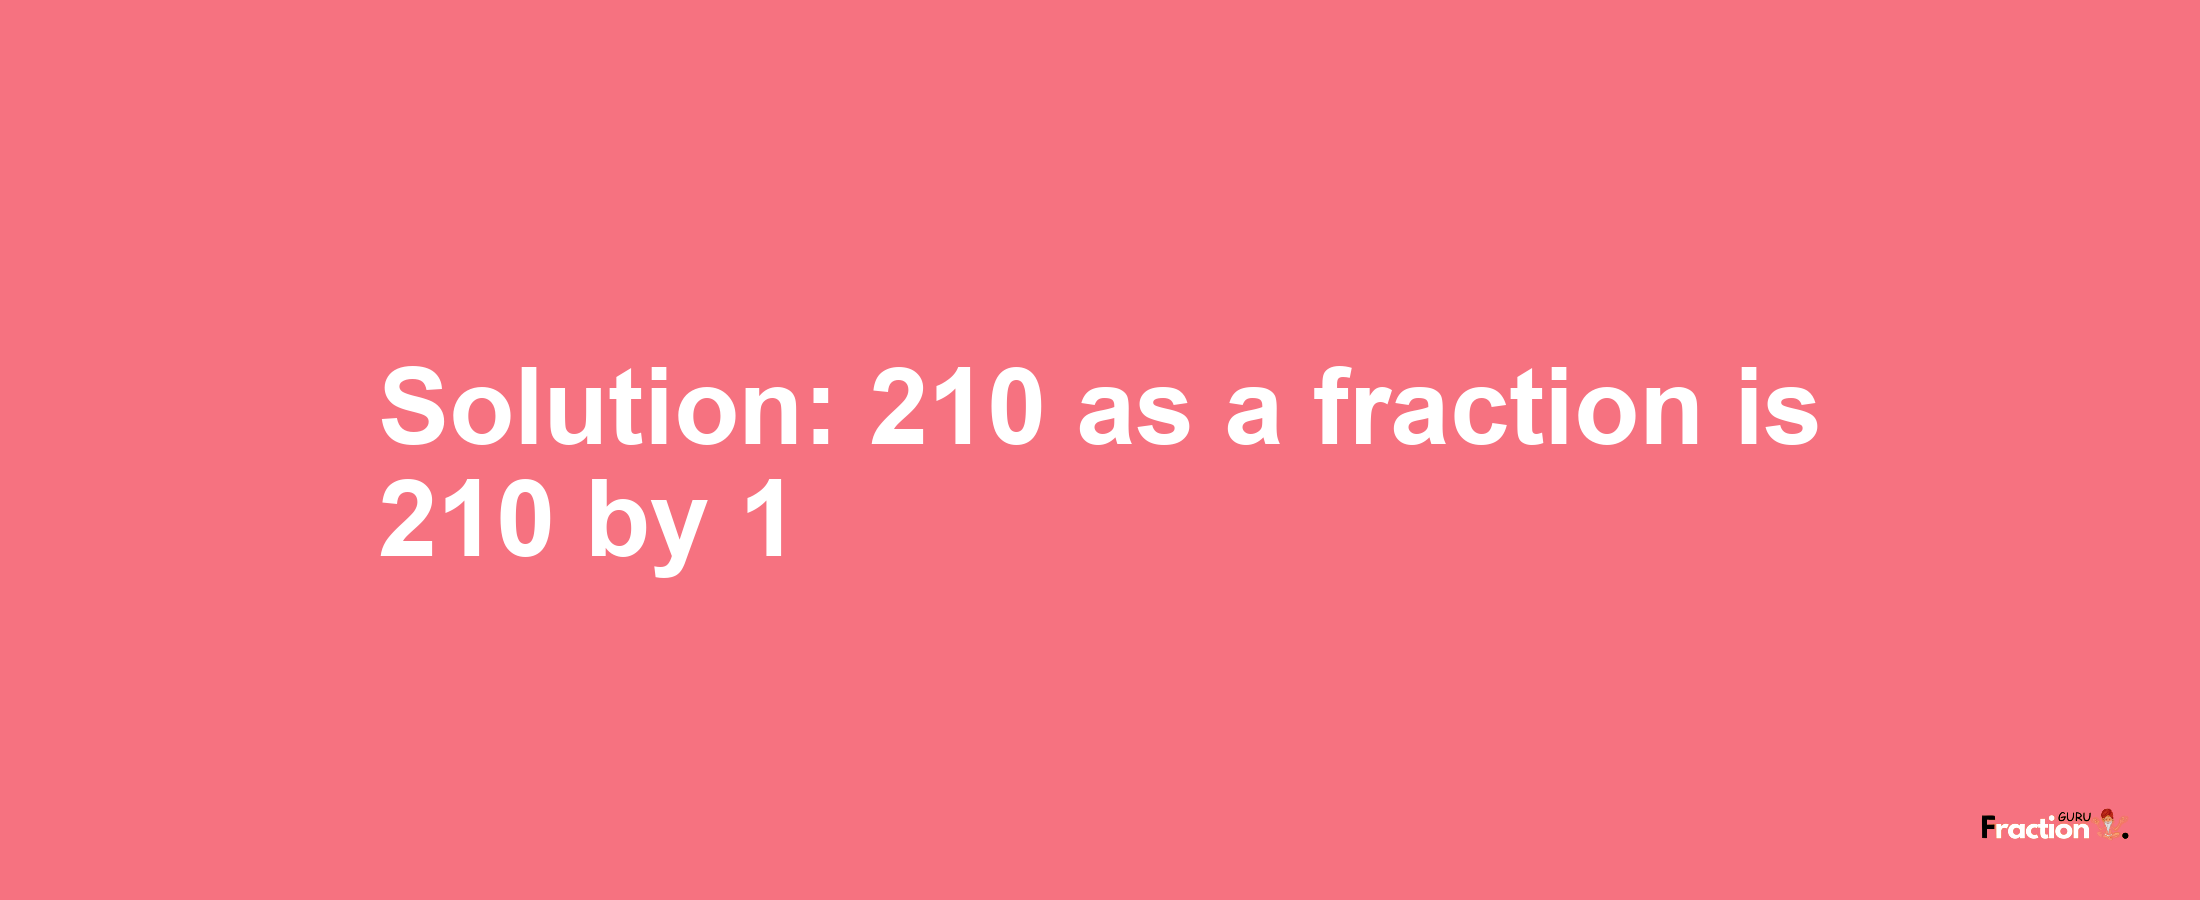 Solution:210 as a fraction is 210/1